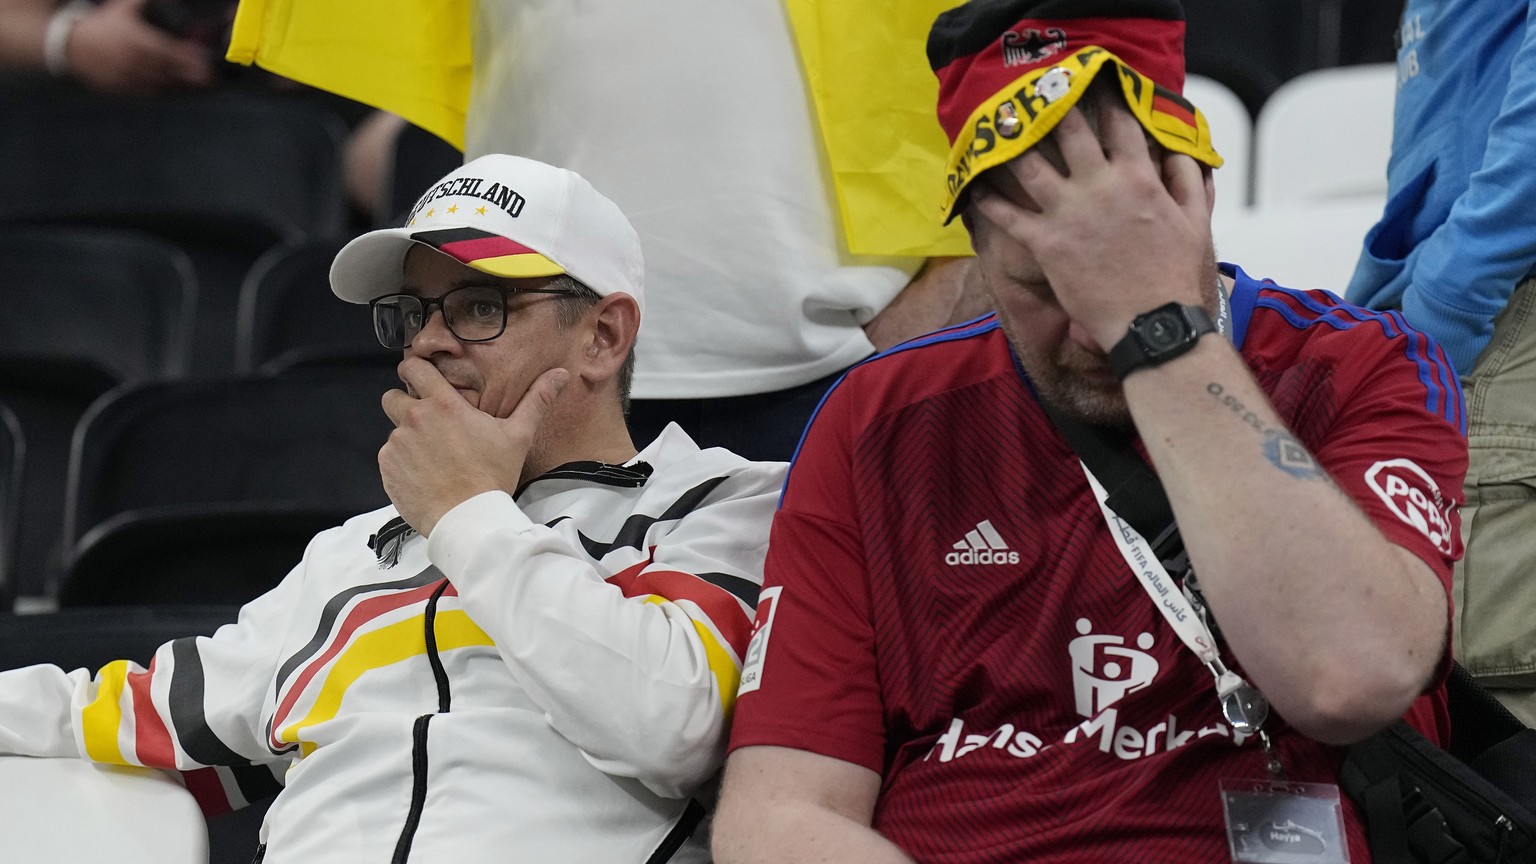 German soccer supporters reacts after the World Cup group E soccer match between Costa Rica and Germany at the Al Bayt Stadium in Al Khor , Qatar, Friday, Dec. 2, 2022. (AP Photo/Martin Meissner)